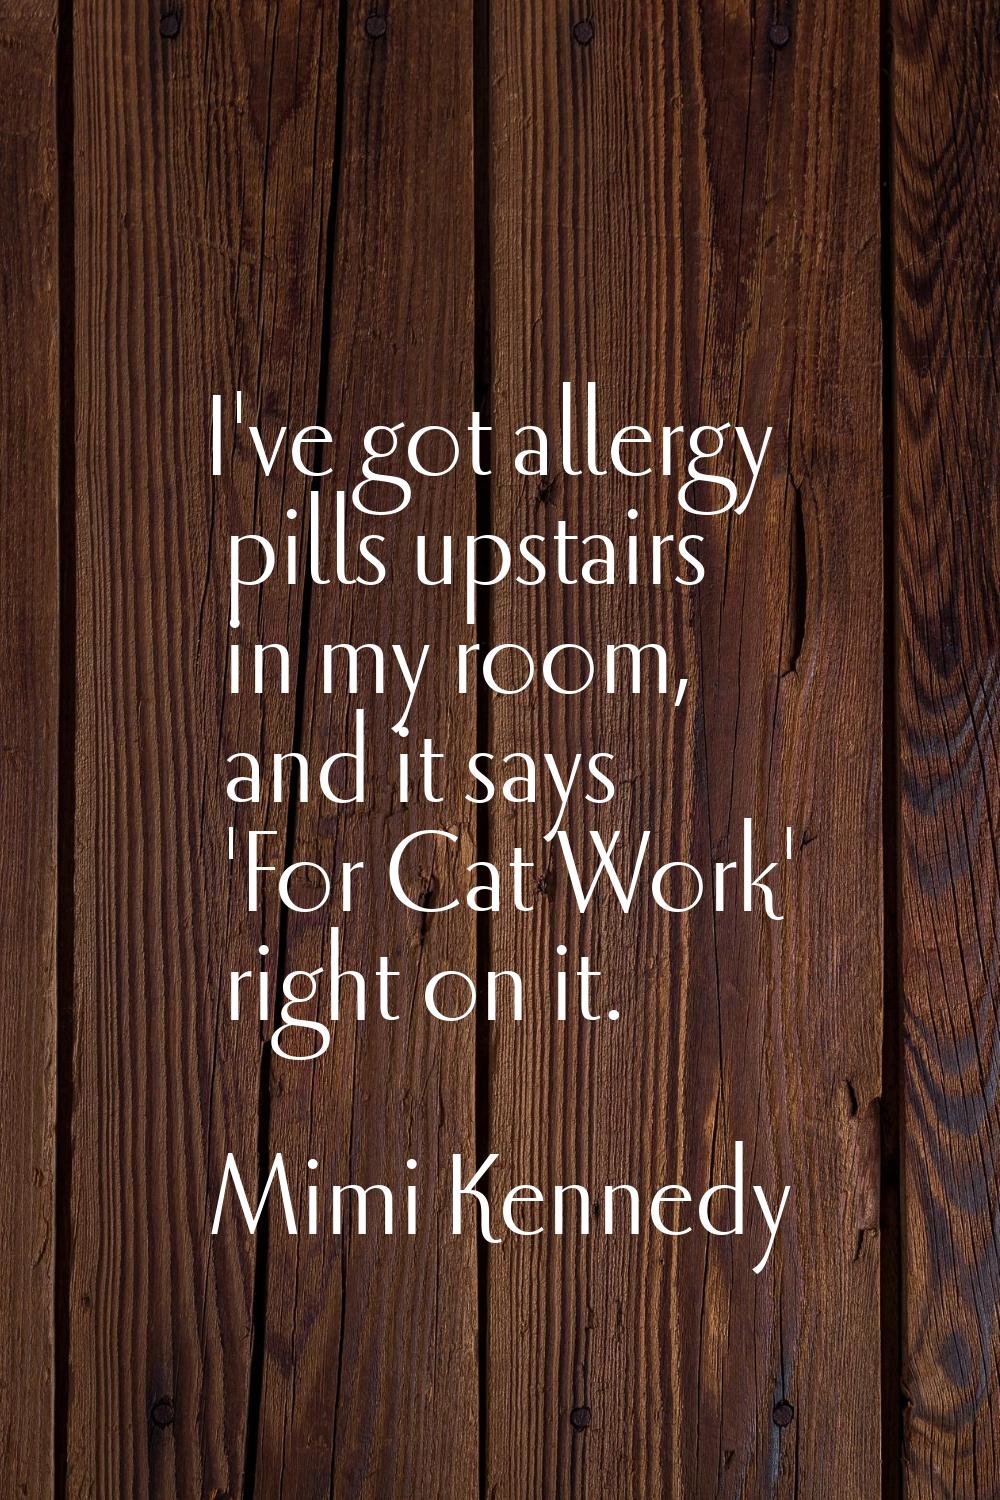 I've got allergy pills upstairs in my room, and it says 'For Cat Work' right on it.